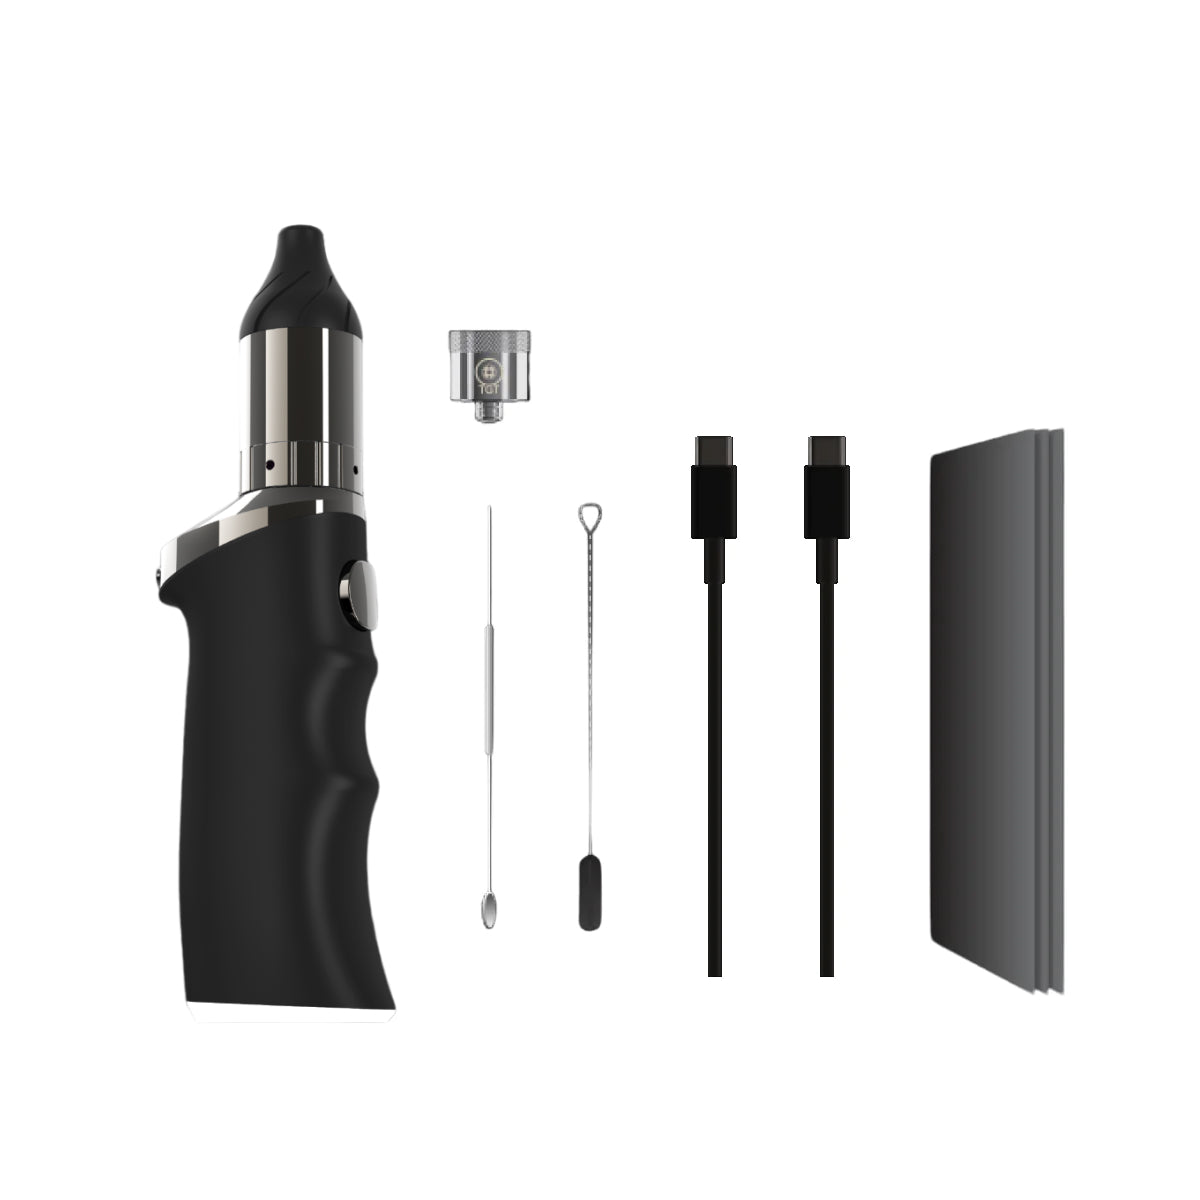 Yocan Black Phaser Ace Wax Vaporizer - what's in the box